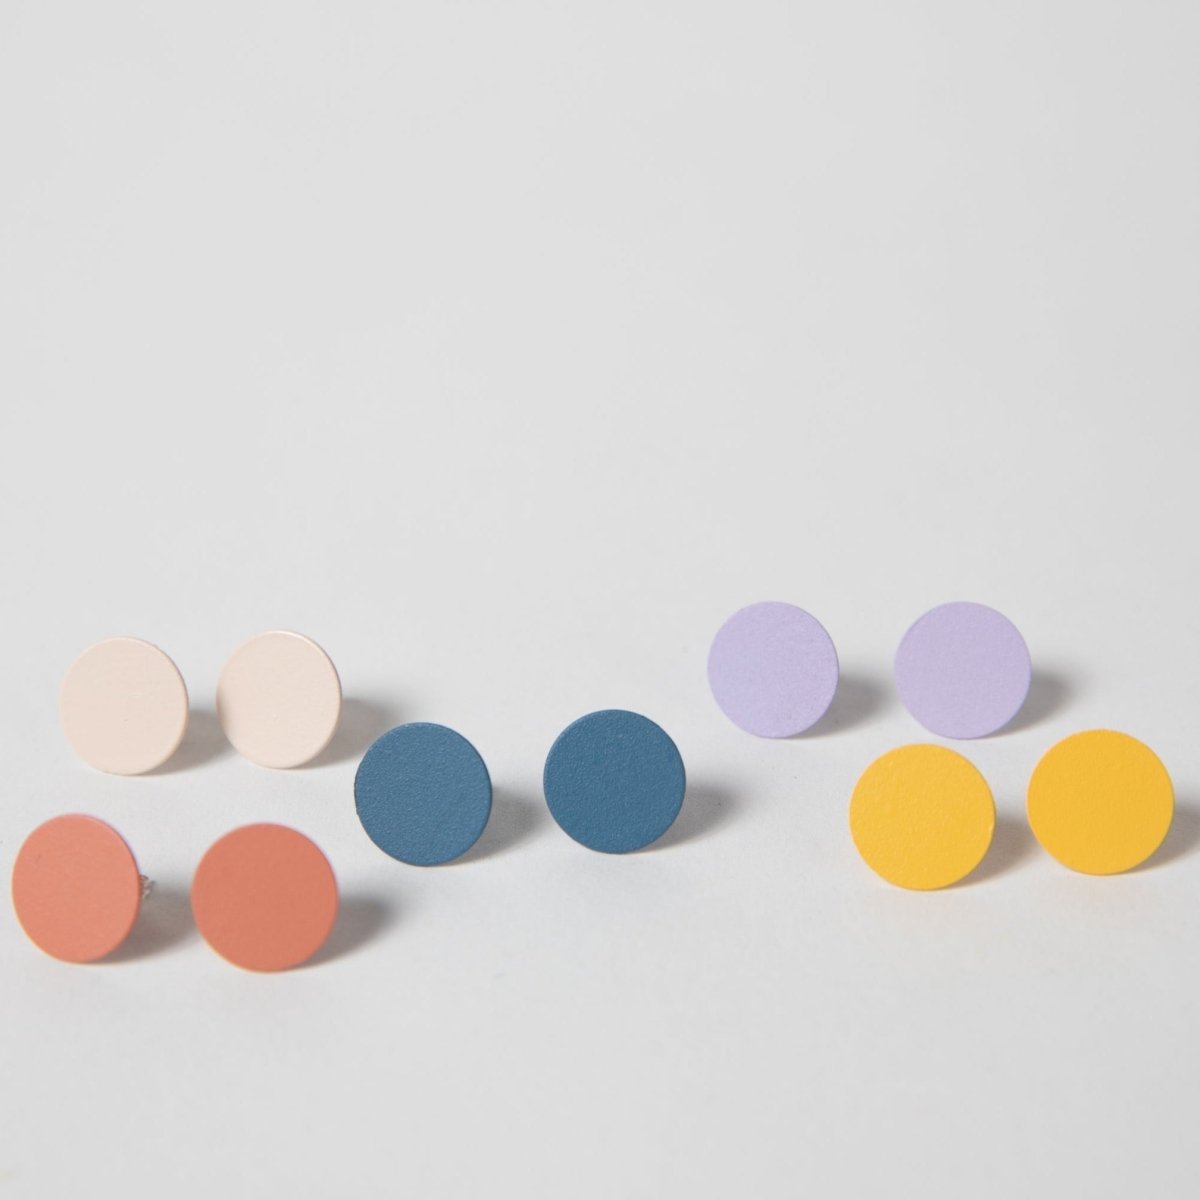 An array of flat stud earrings in Cream, Coral, Cobalt, Lilac and Marigold. The Dot earrings are designed and crafted by Pretti.cool in Houston, Texas.